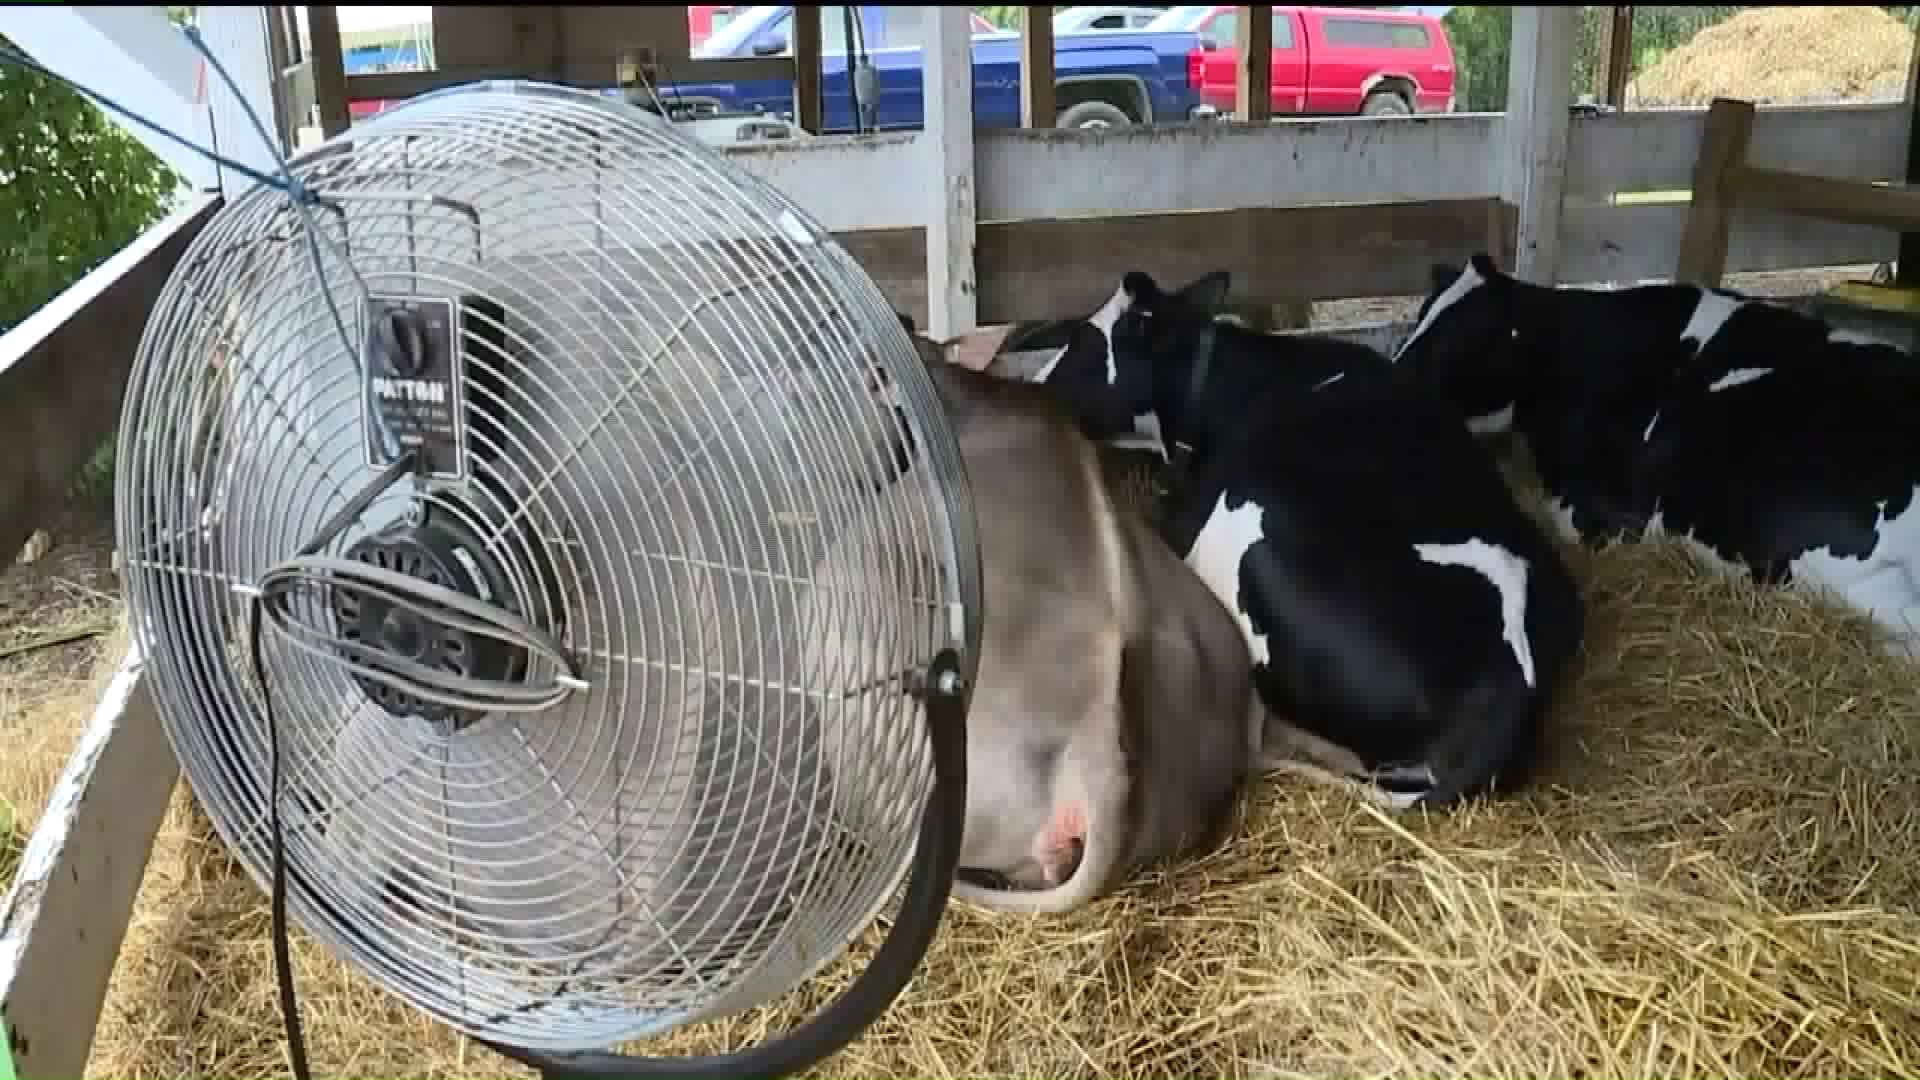 Keeping the Animals Cool at the Fair